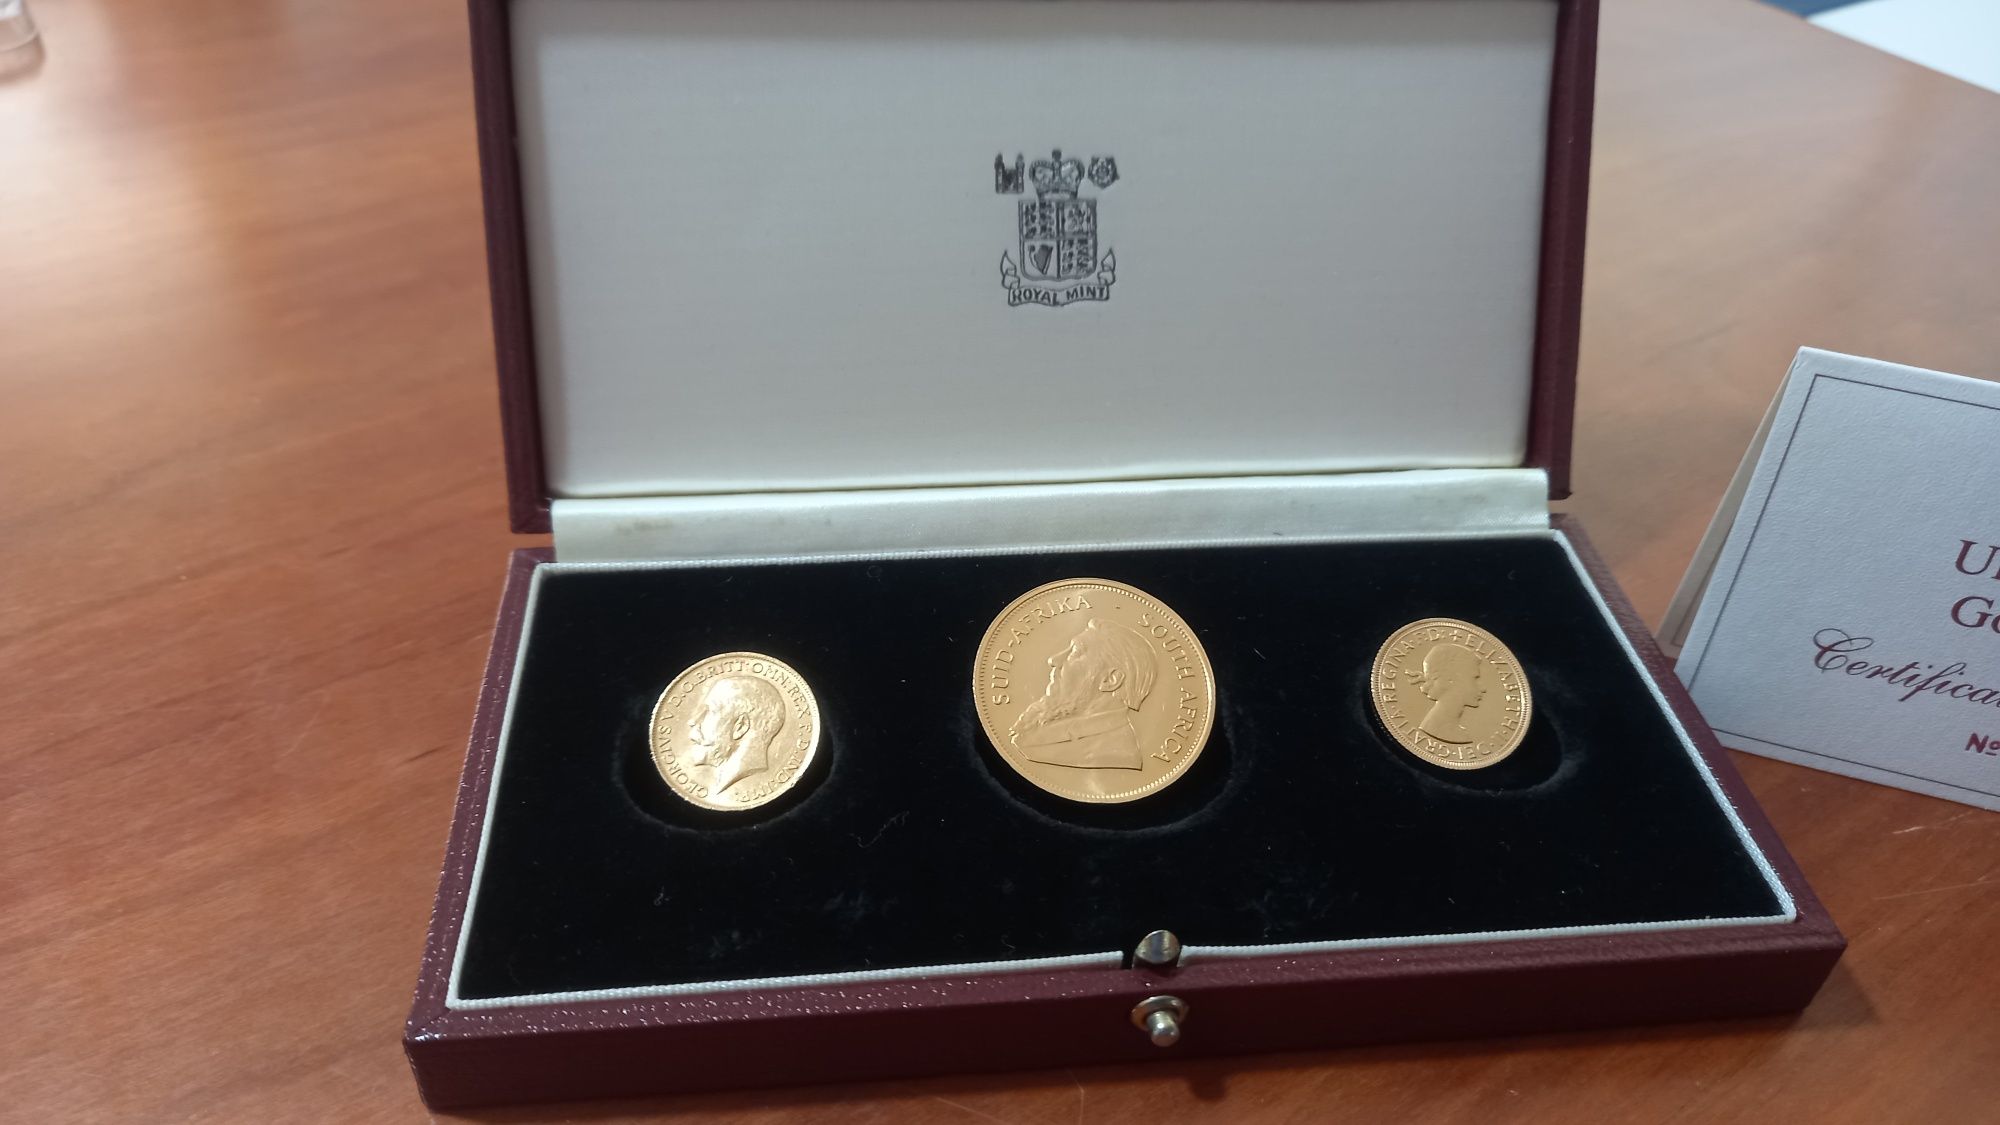 Moedas Ouro The Royal Mint